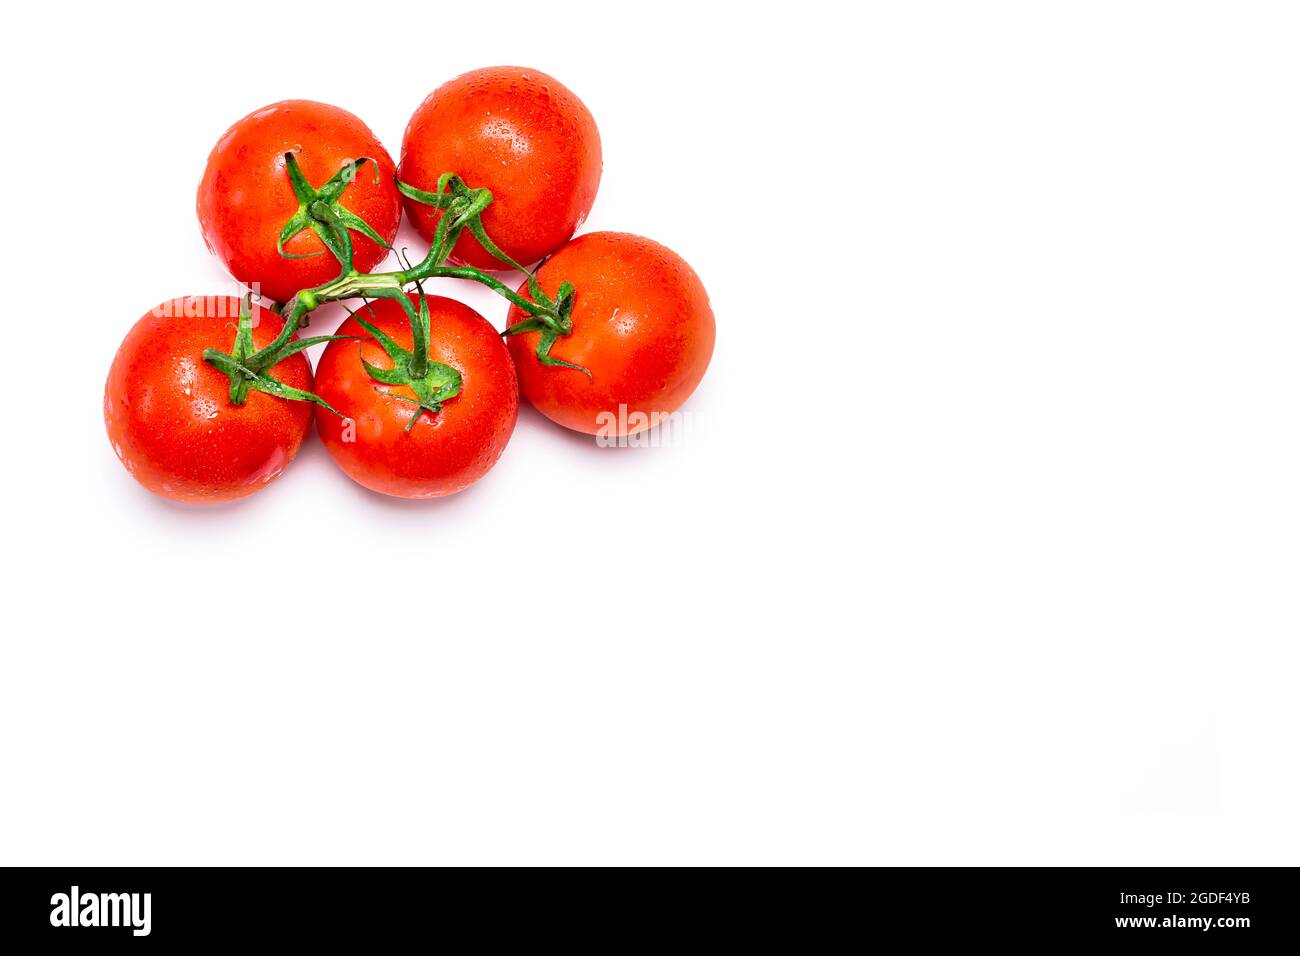 Overhead photograph of a bunch of five red natural tomatoes on a white background.The photo is taken in horizontal format and has copy space. Stock Photo